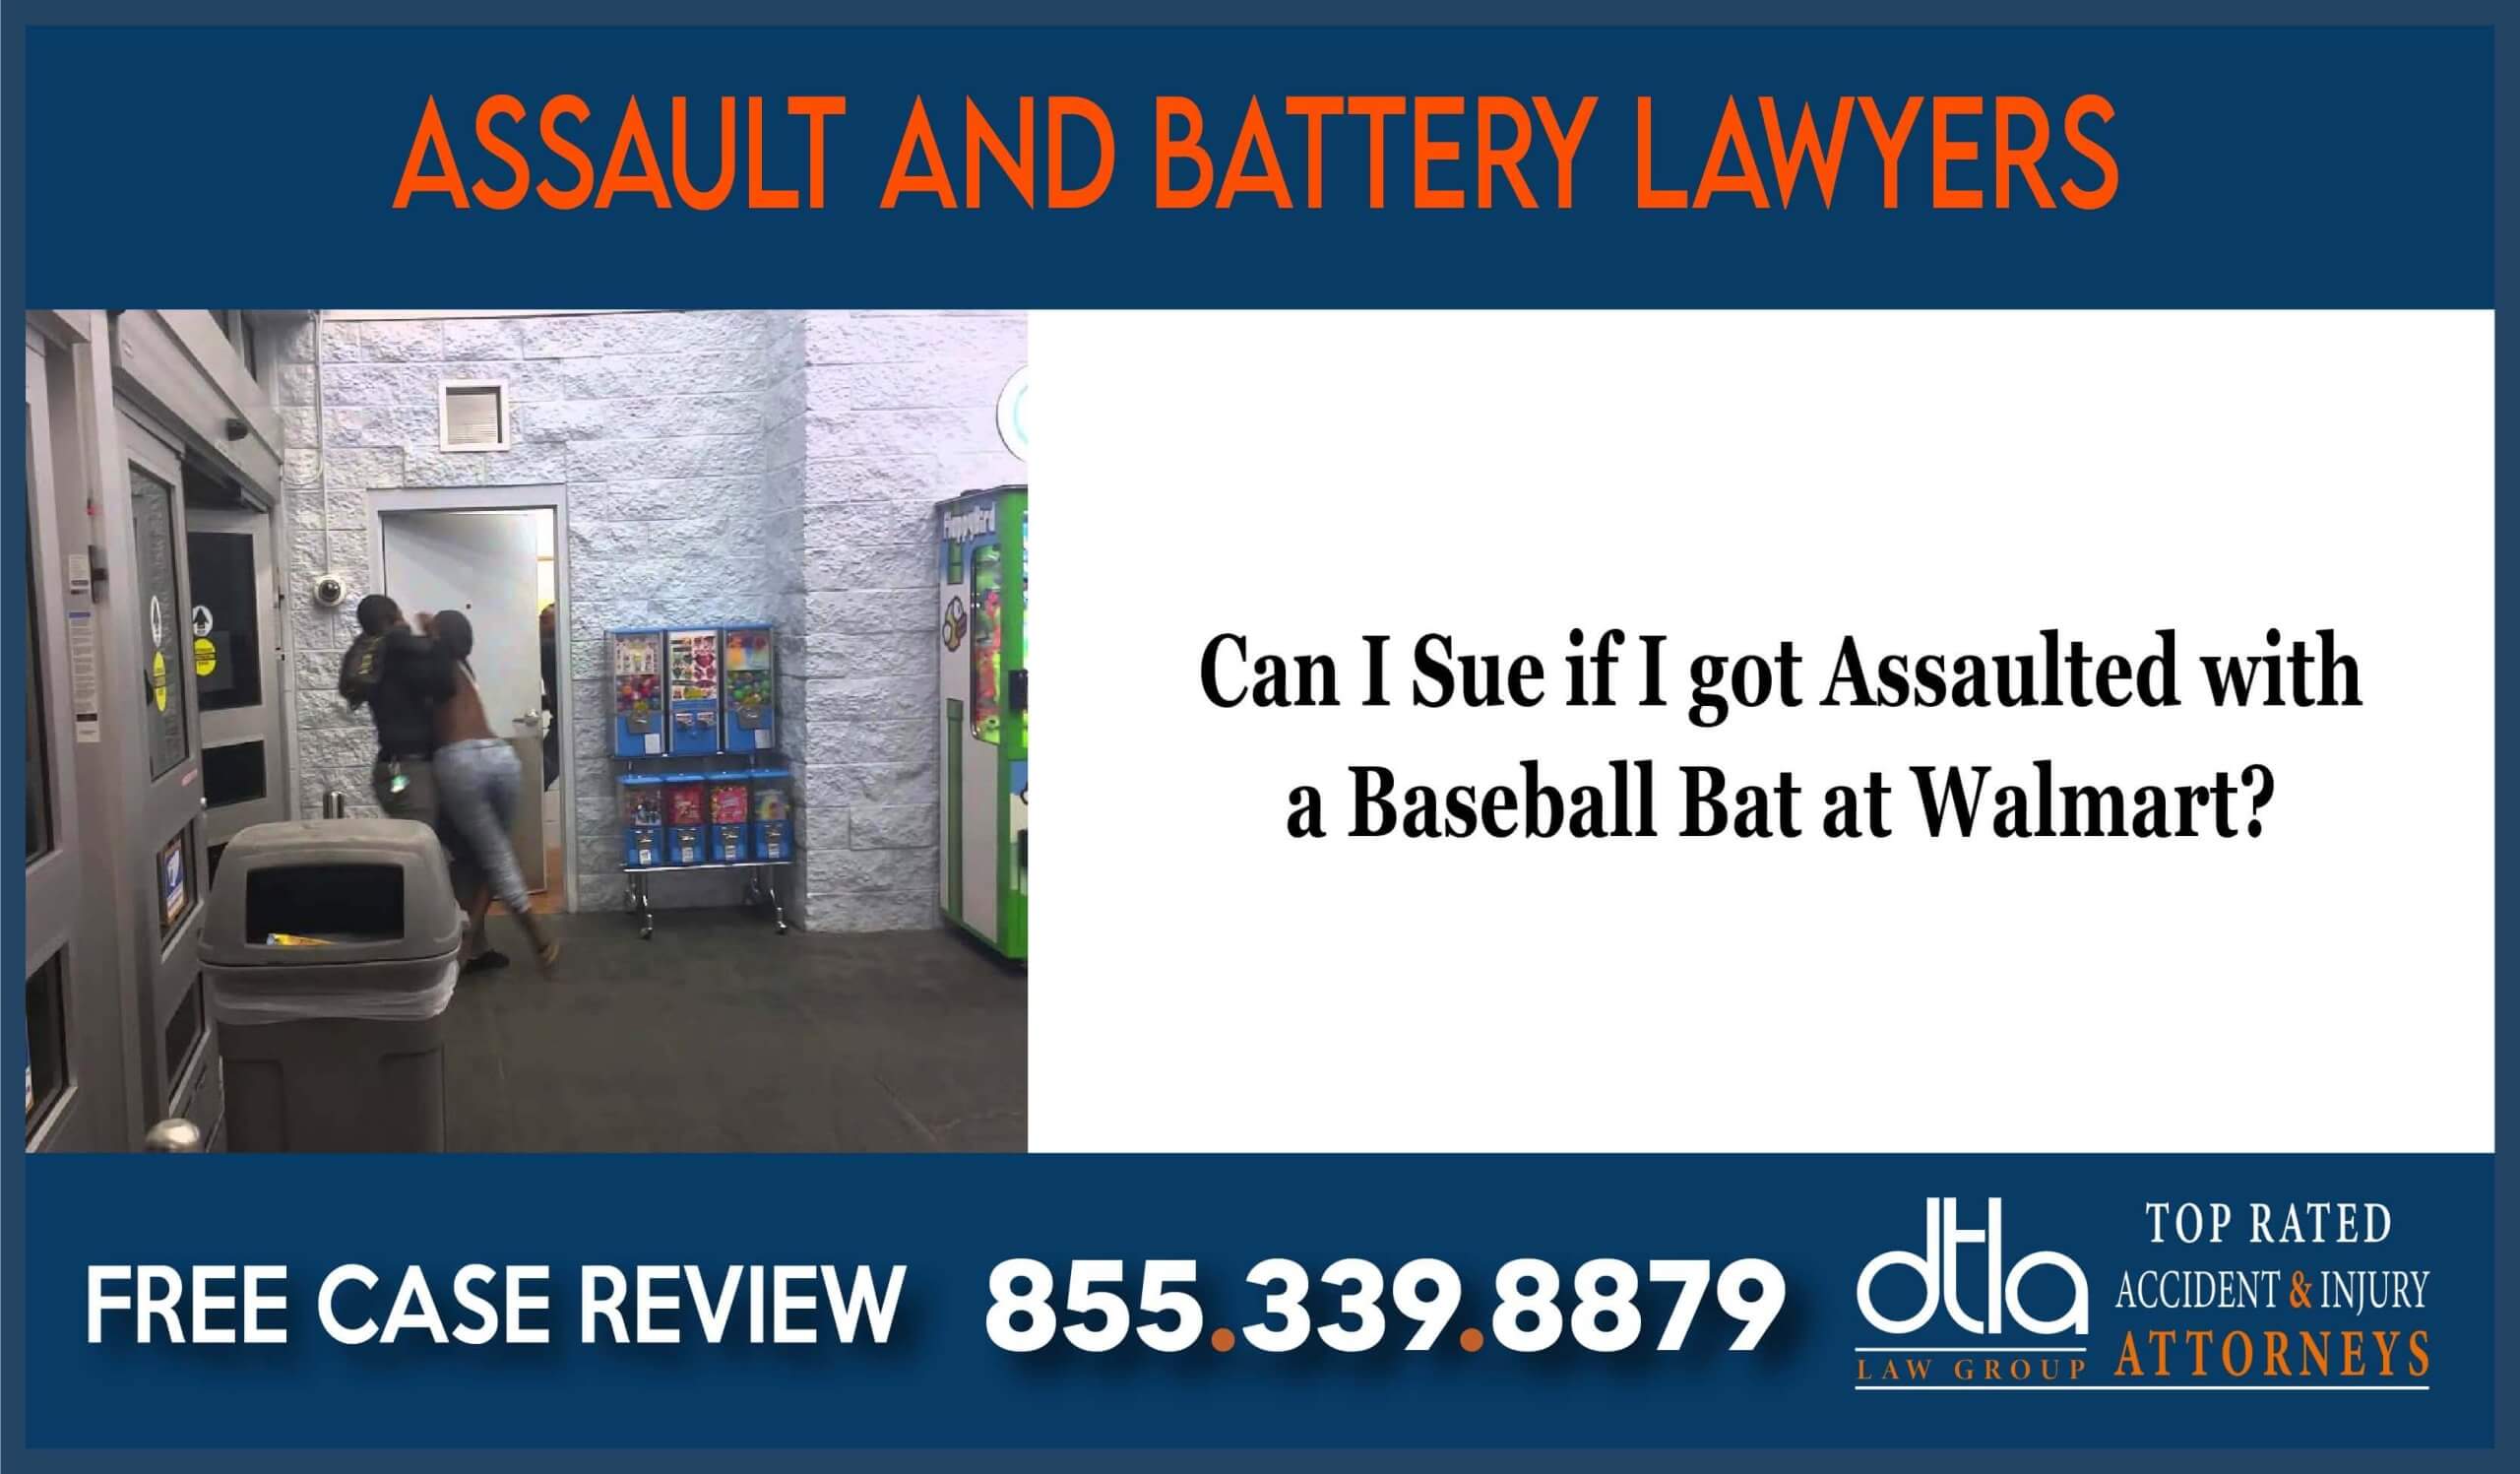 Can I Sue if I got Assaulted with a Baseball Bat at Walmart incident liability lawsuit attorney sue